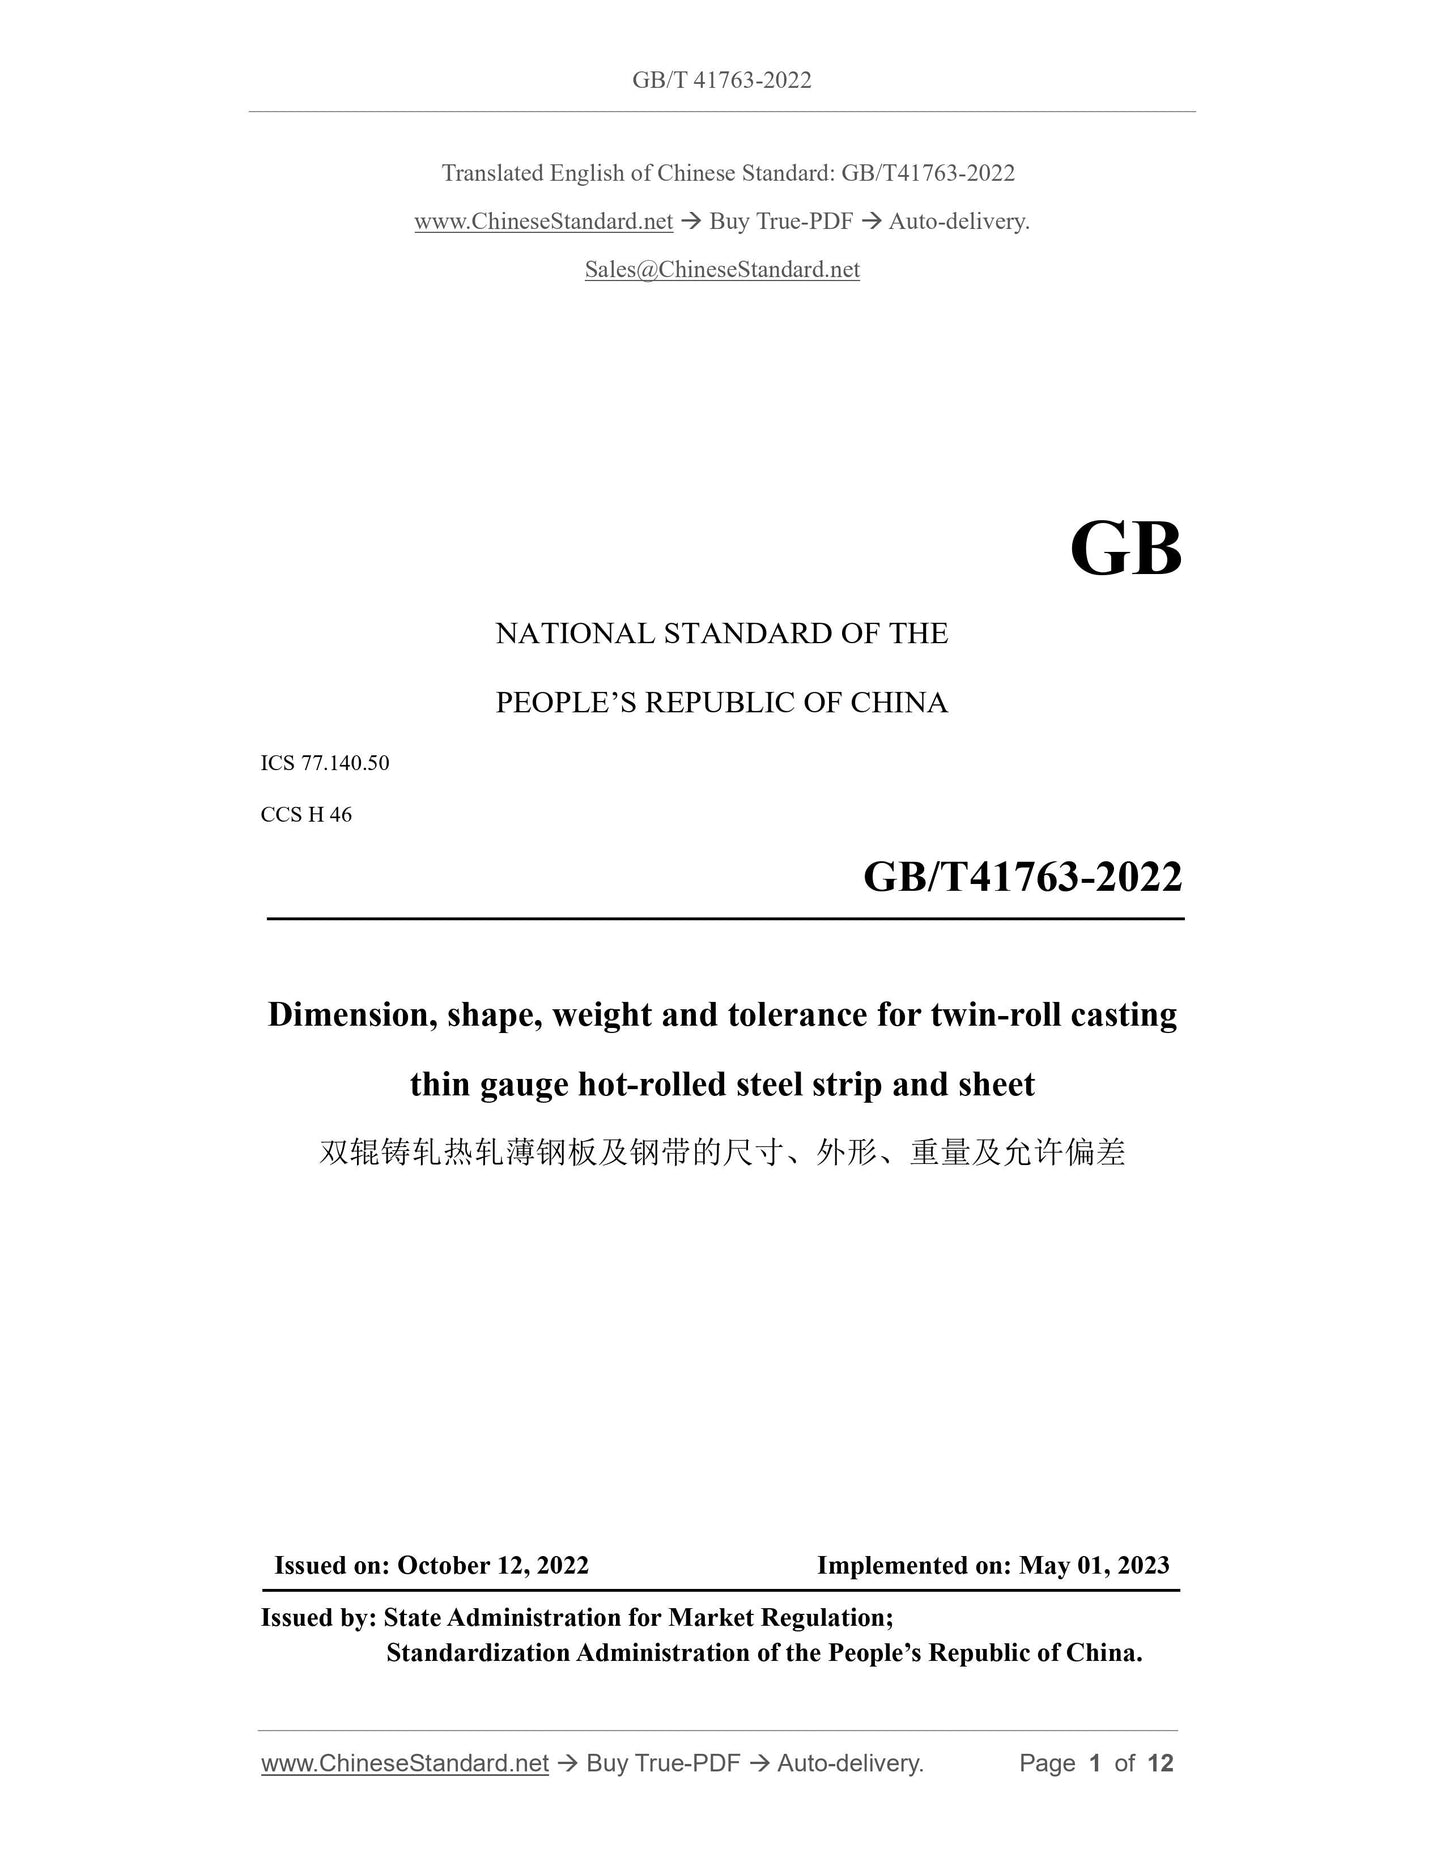 GB/T 41763-2022 Page 1